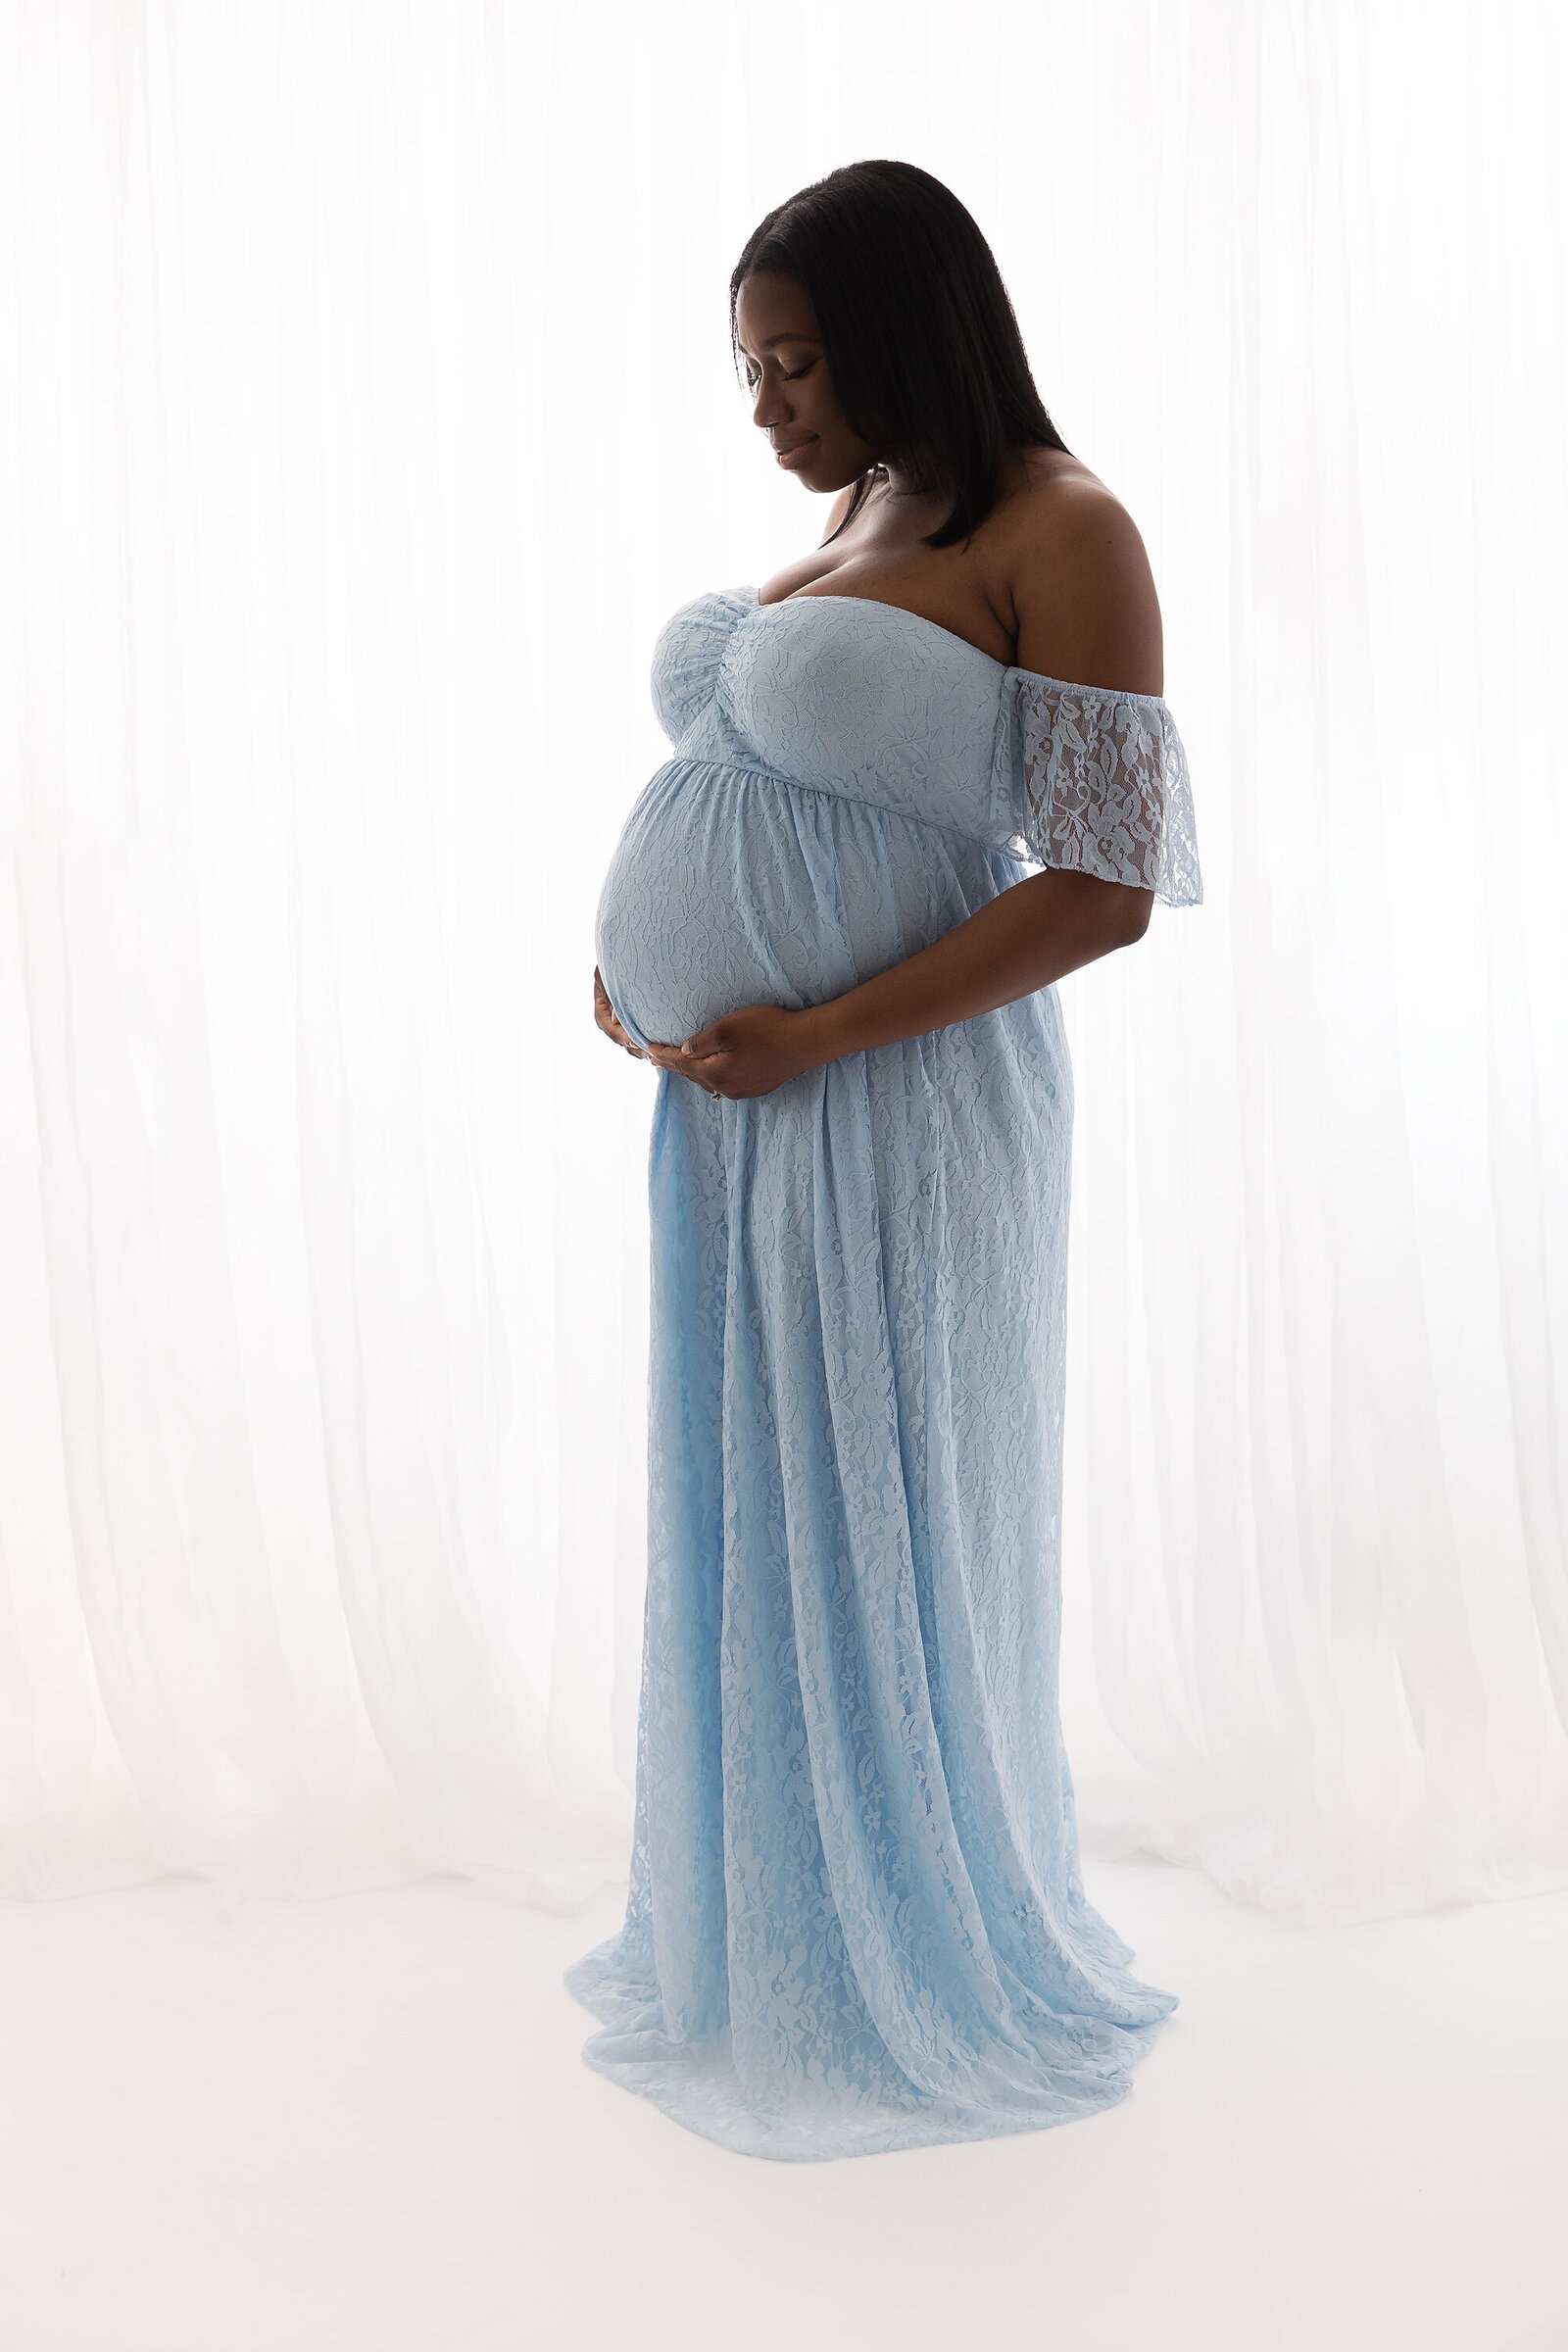 Philadelphia maternity photography session of black woman in blue dress